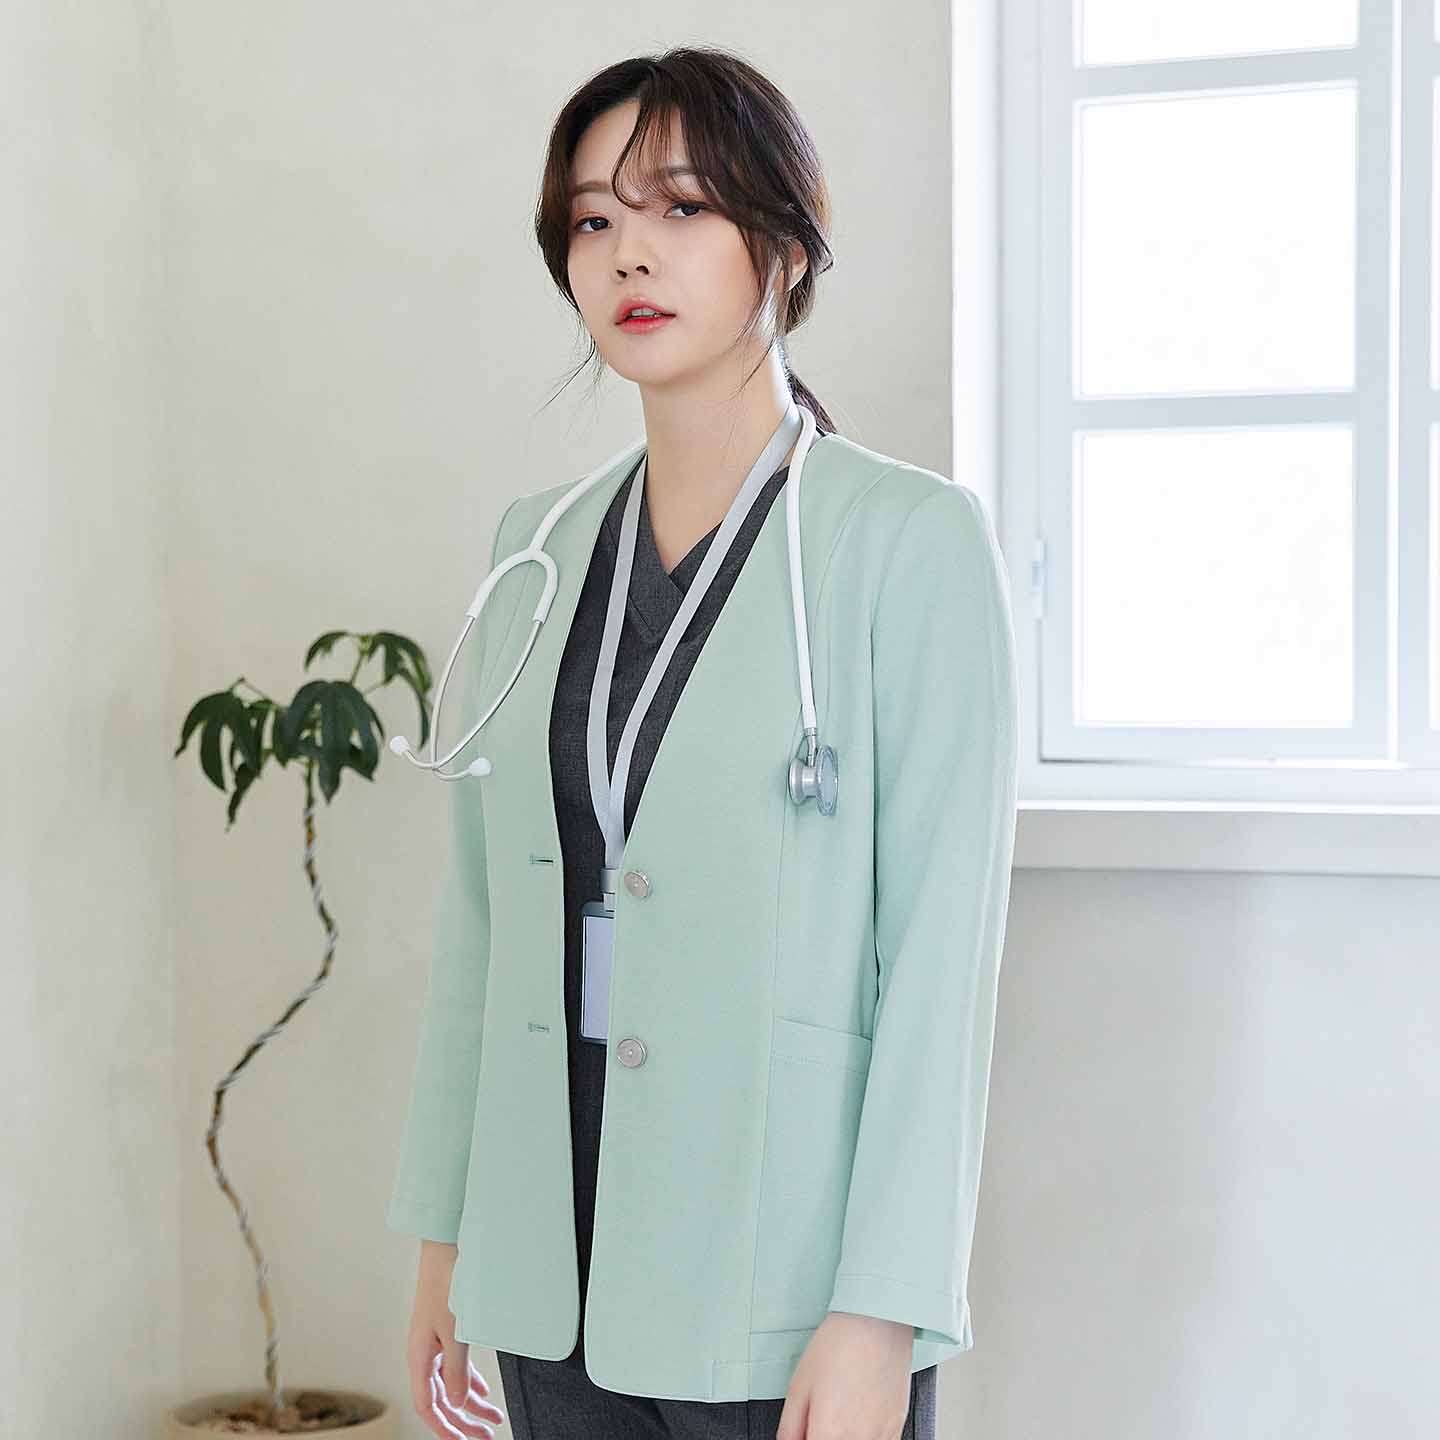 A woman wearing a stethoscope around her neck and a mint-colored jacket, standing by a window with a potted plant in the background,Soft Mint